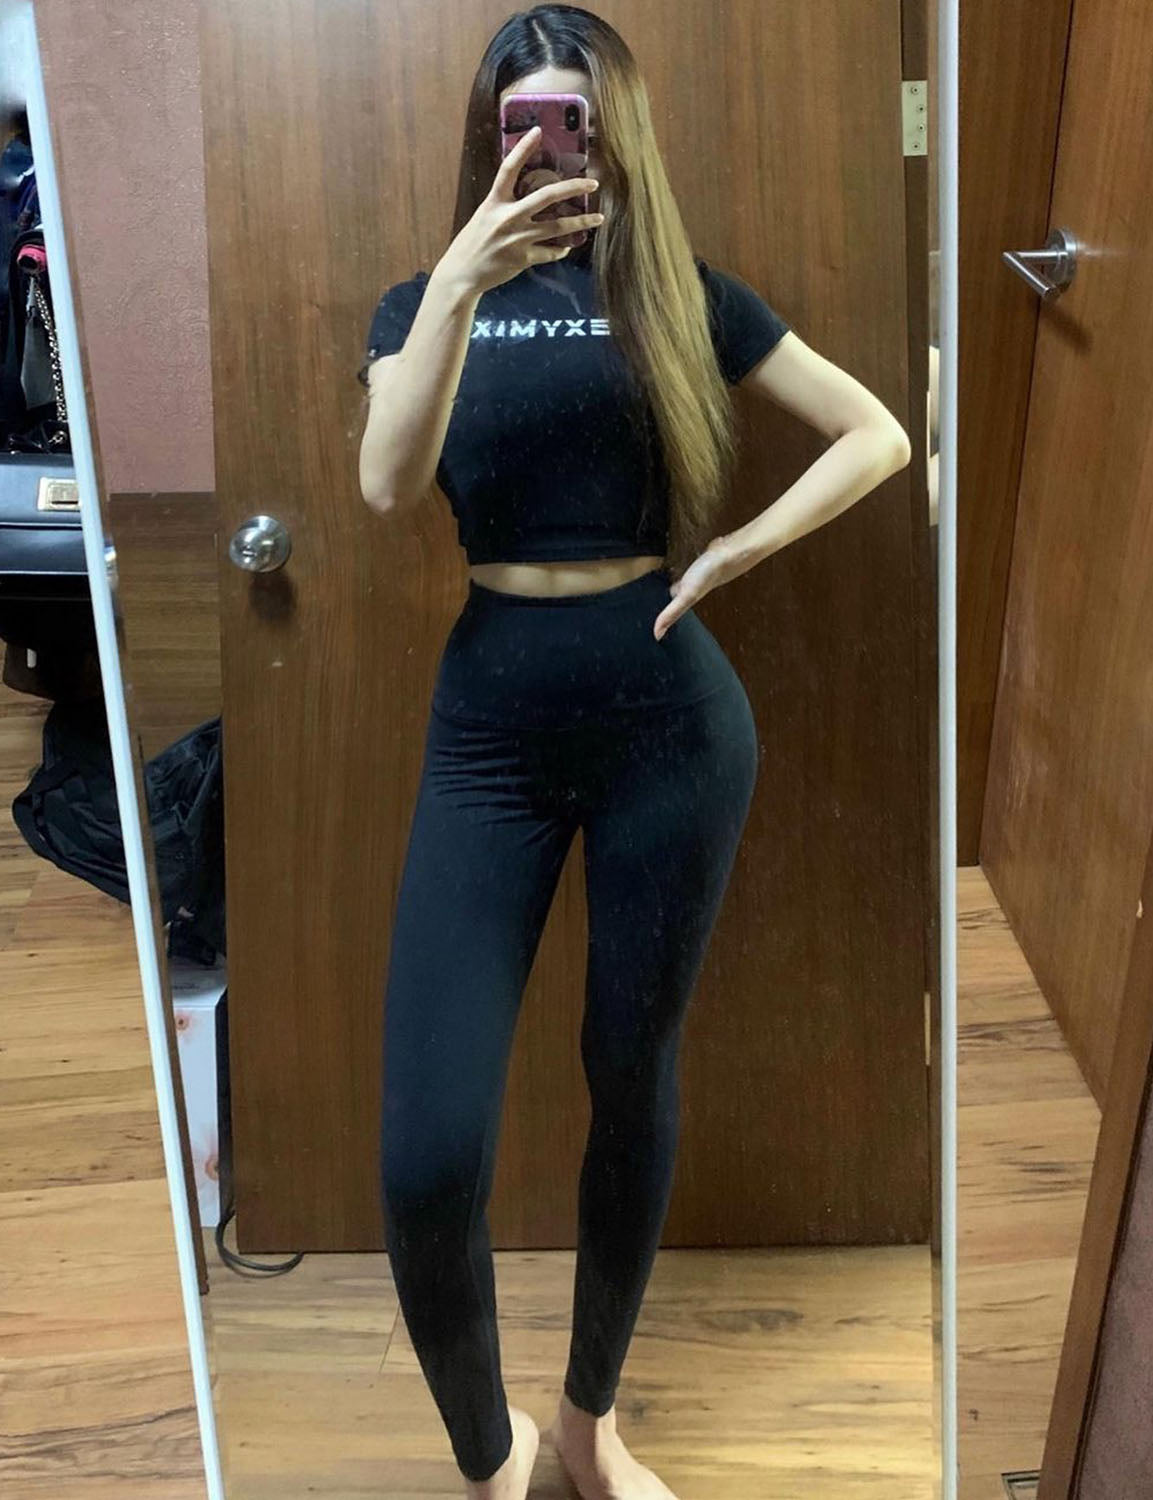 High Waist Gym Pants black 75%Nylon/25%Spandex Fabric doesn't attract lint easily 4-way stretch No see-through Moisture-wicking Tummy control Inner pocket Four lengths